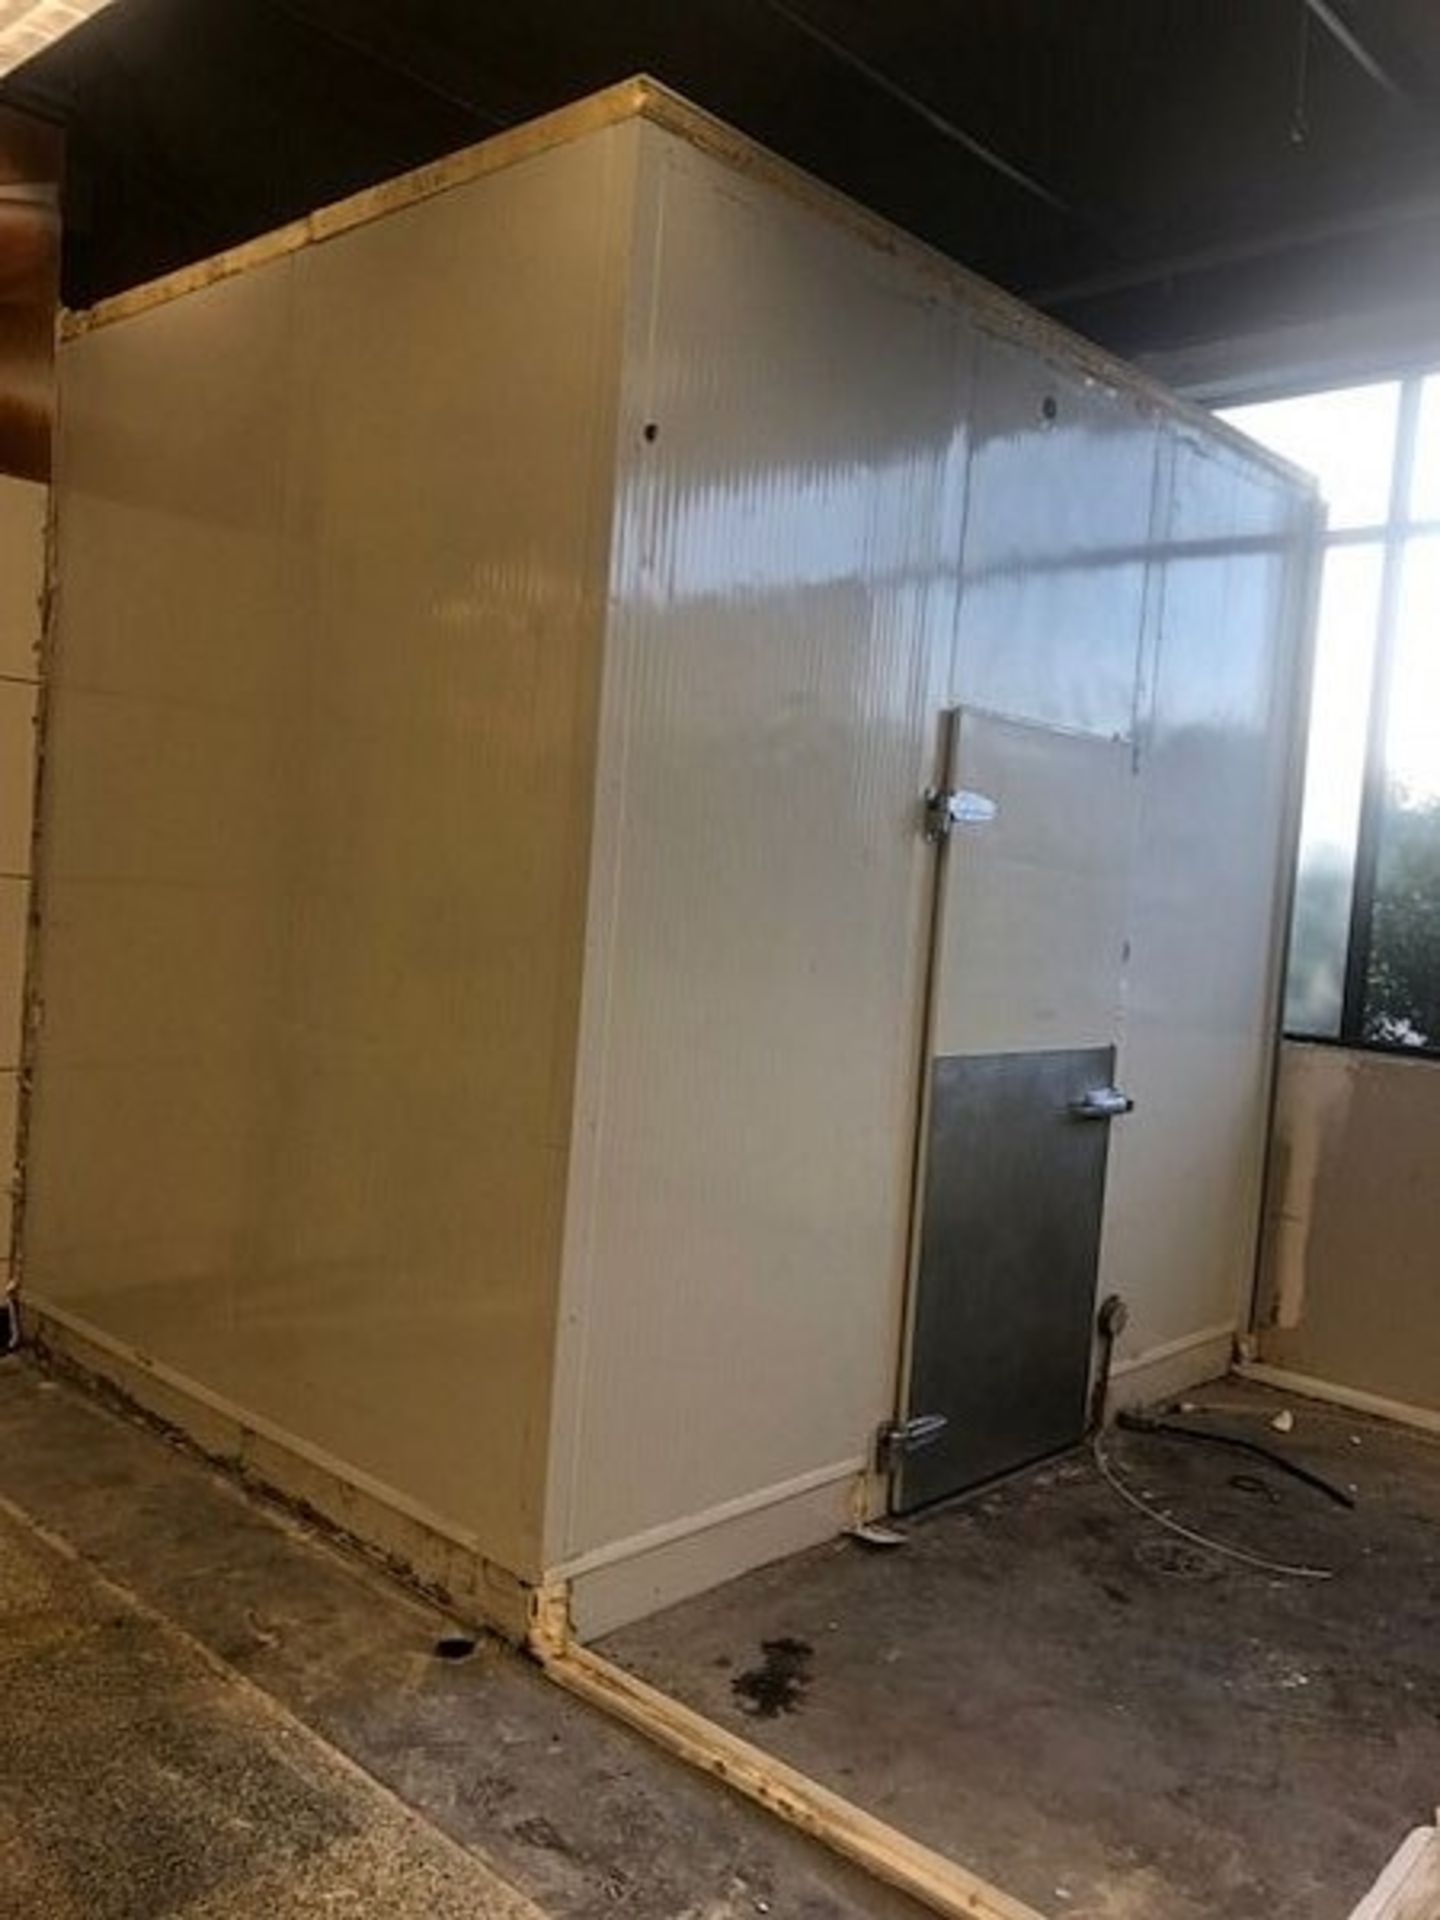 109 x 135 " Walk in Cooler Box with lights - No Refrigeration